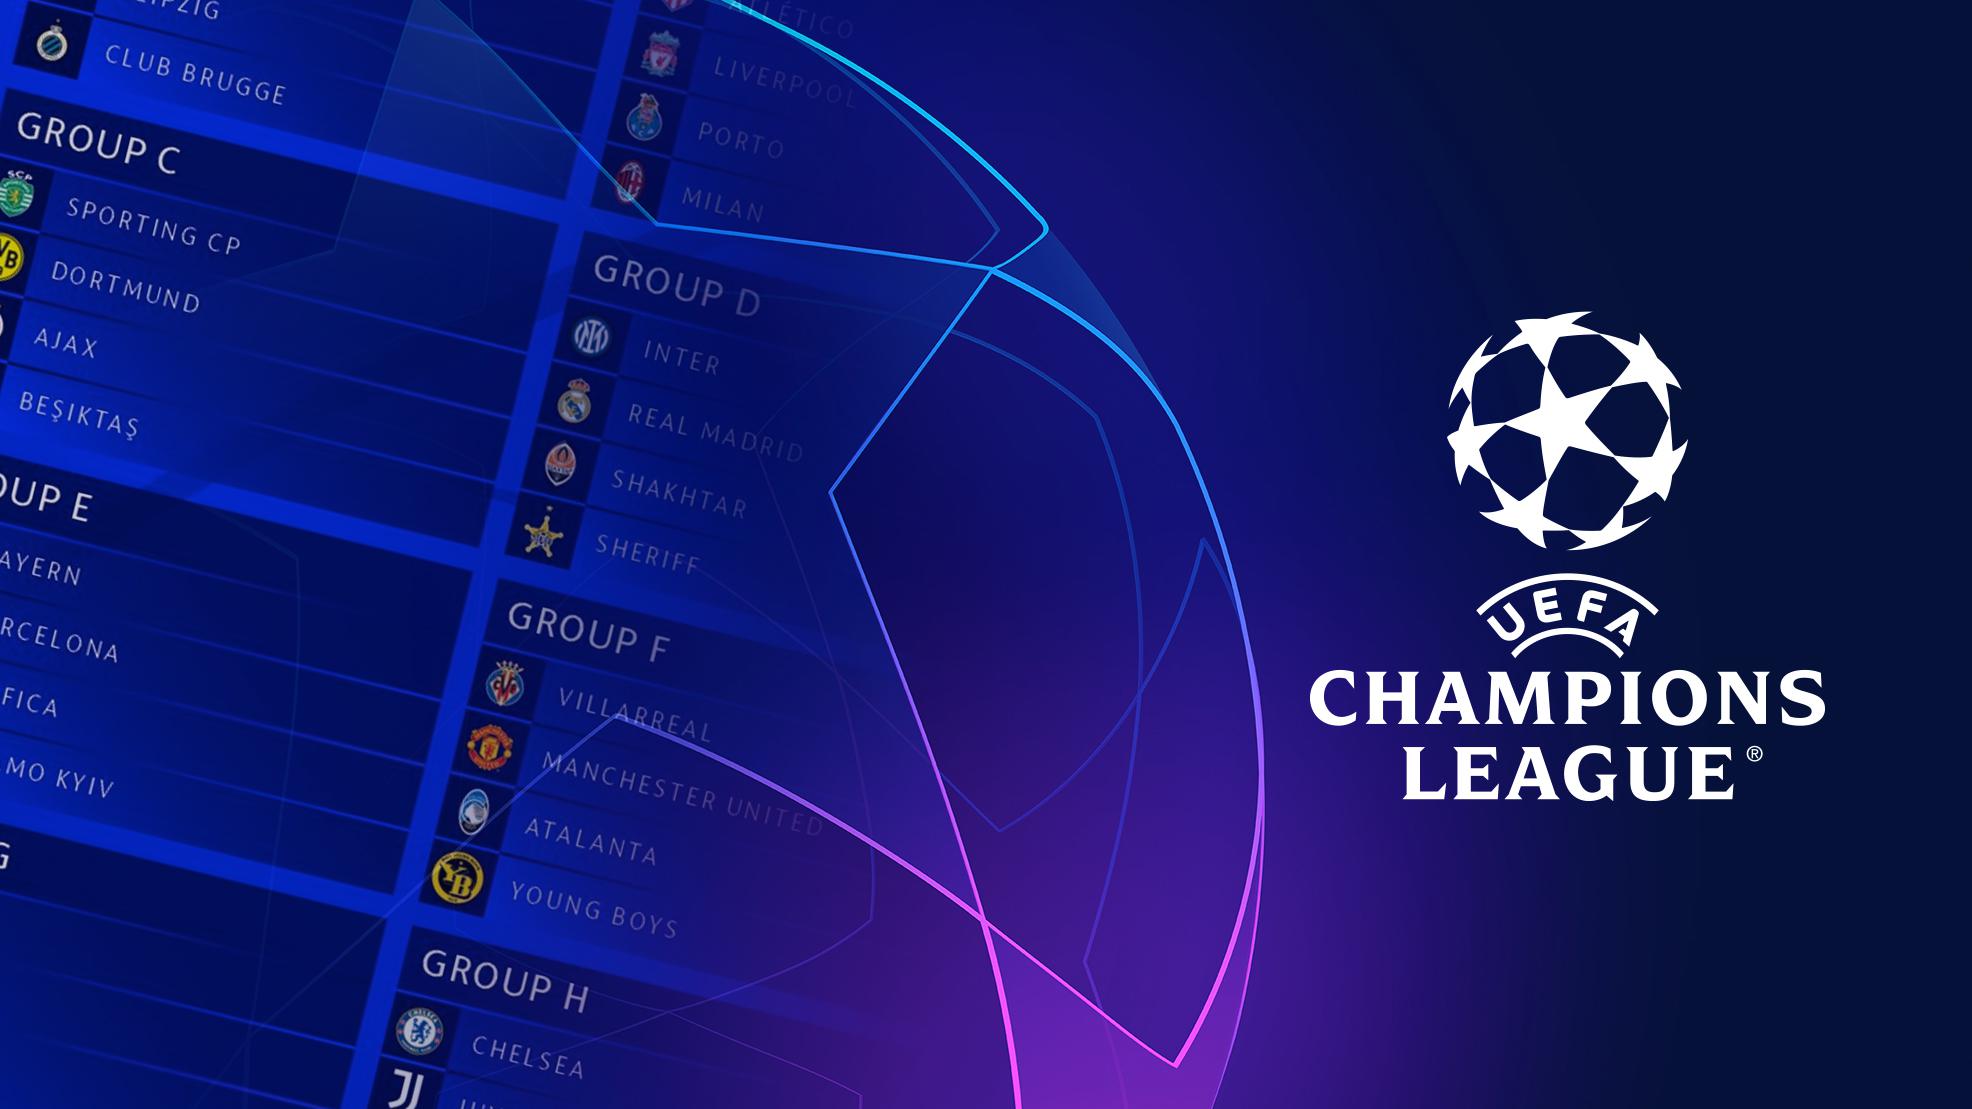 Champions League Schedule 2022 Percy Weisenberger